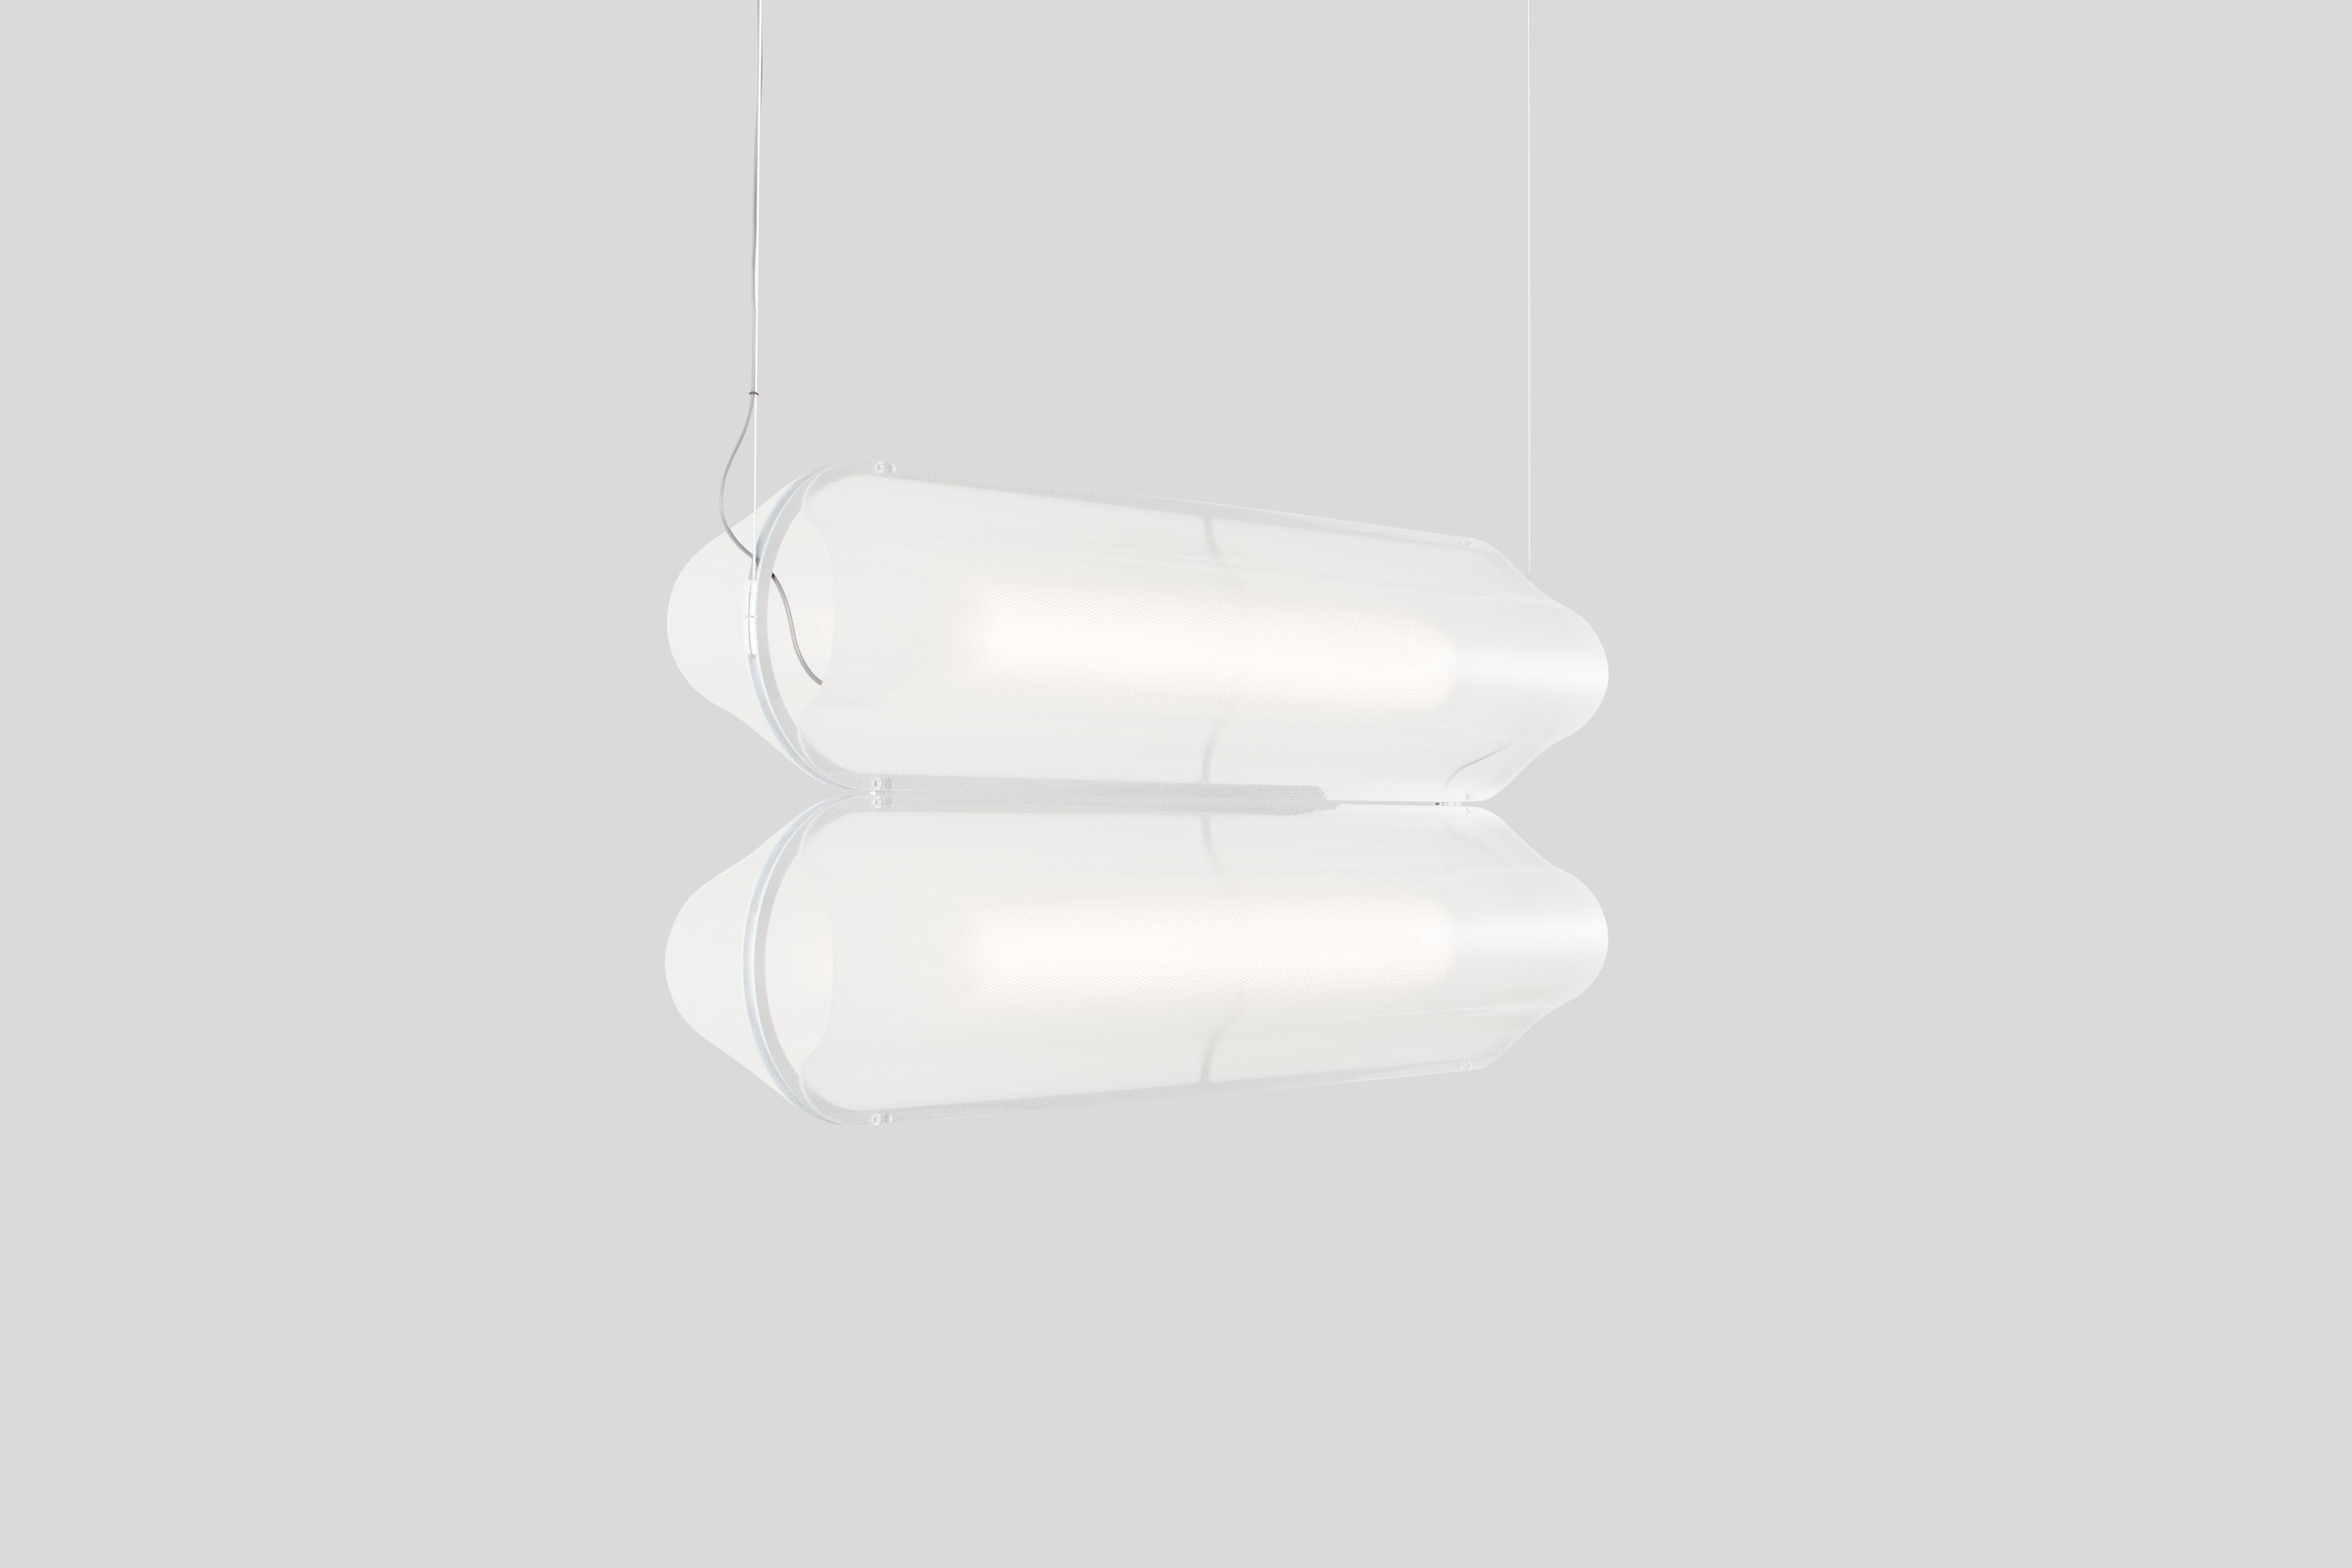 VALE - Pendant lamp
Design: Caine Heintzman, Editor: ANDLight

The Vale series optimises functionality through its multidirectional luminescence while diffusing soft ambient light.

Materials
– Acrylic
– Aluminum

Dimensions
102 x 30 x 23